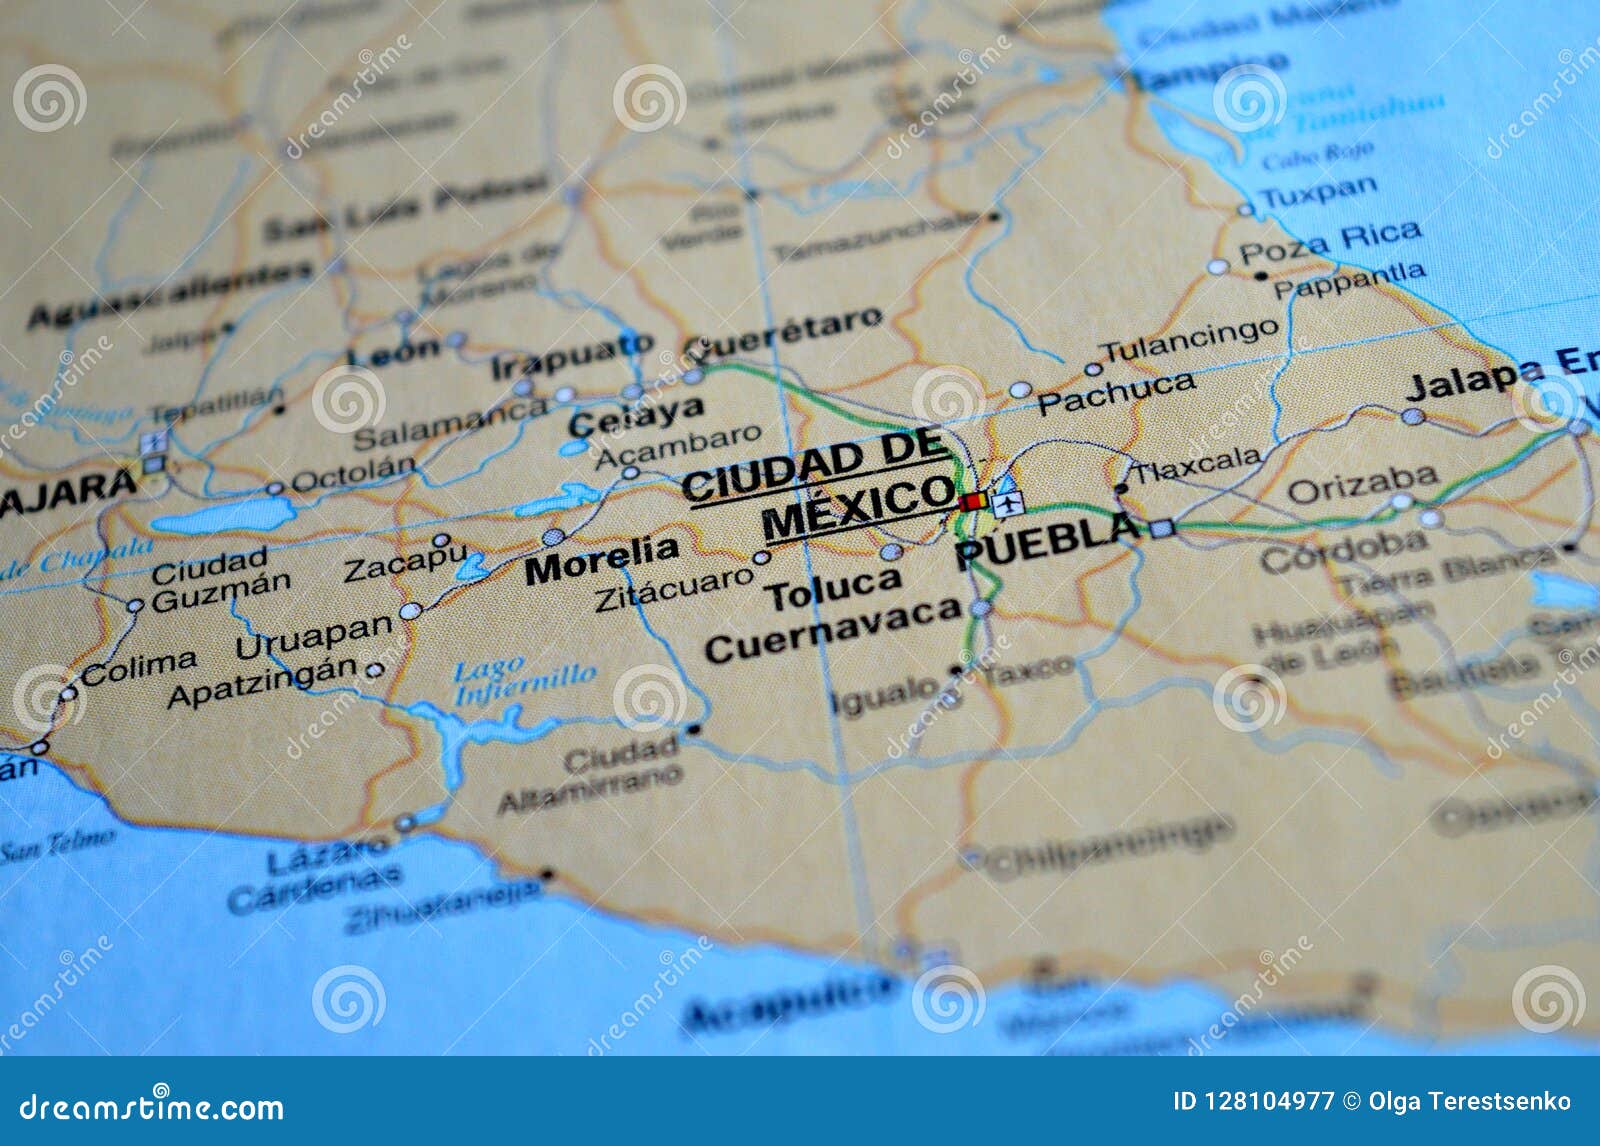 A Photo of Ciudad De Mexico on a Map Stock Image - Image of roads